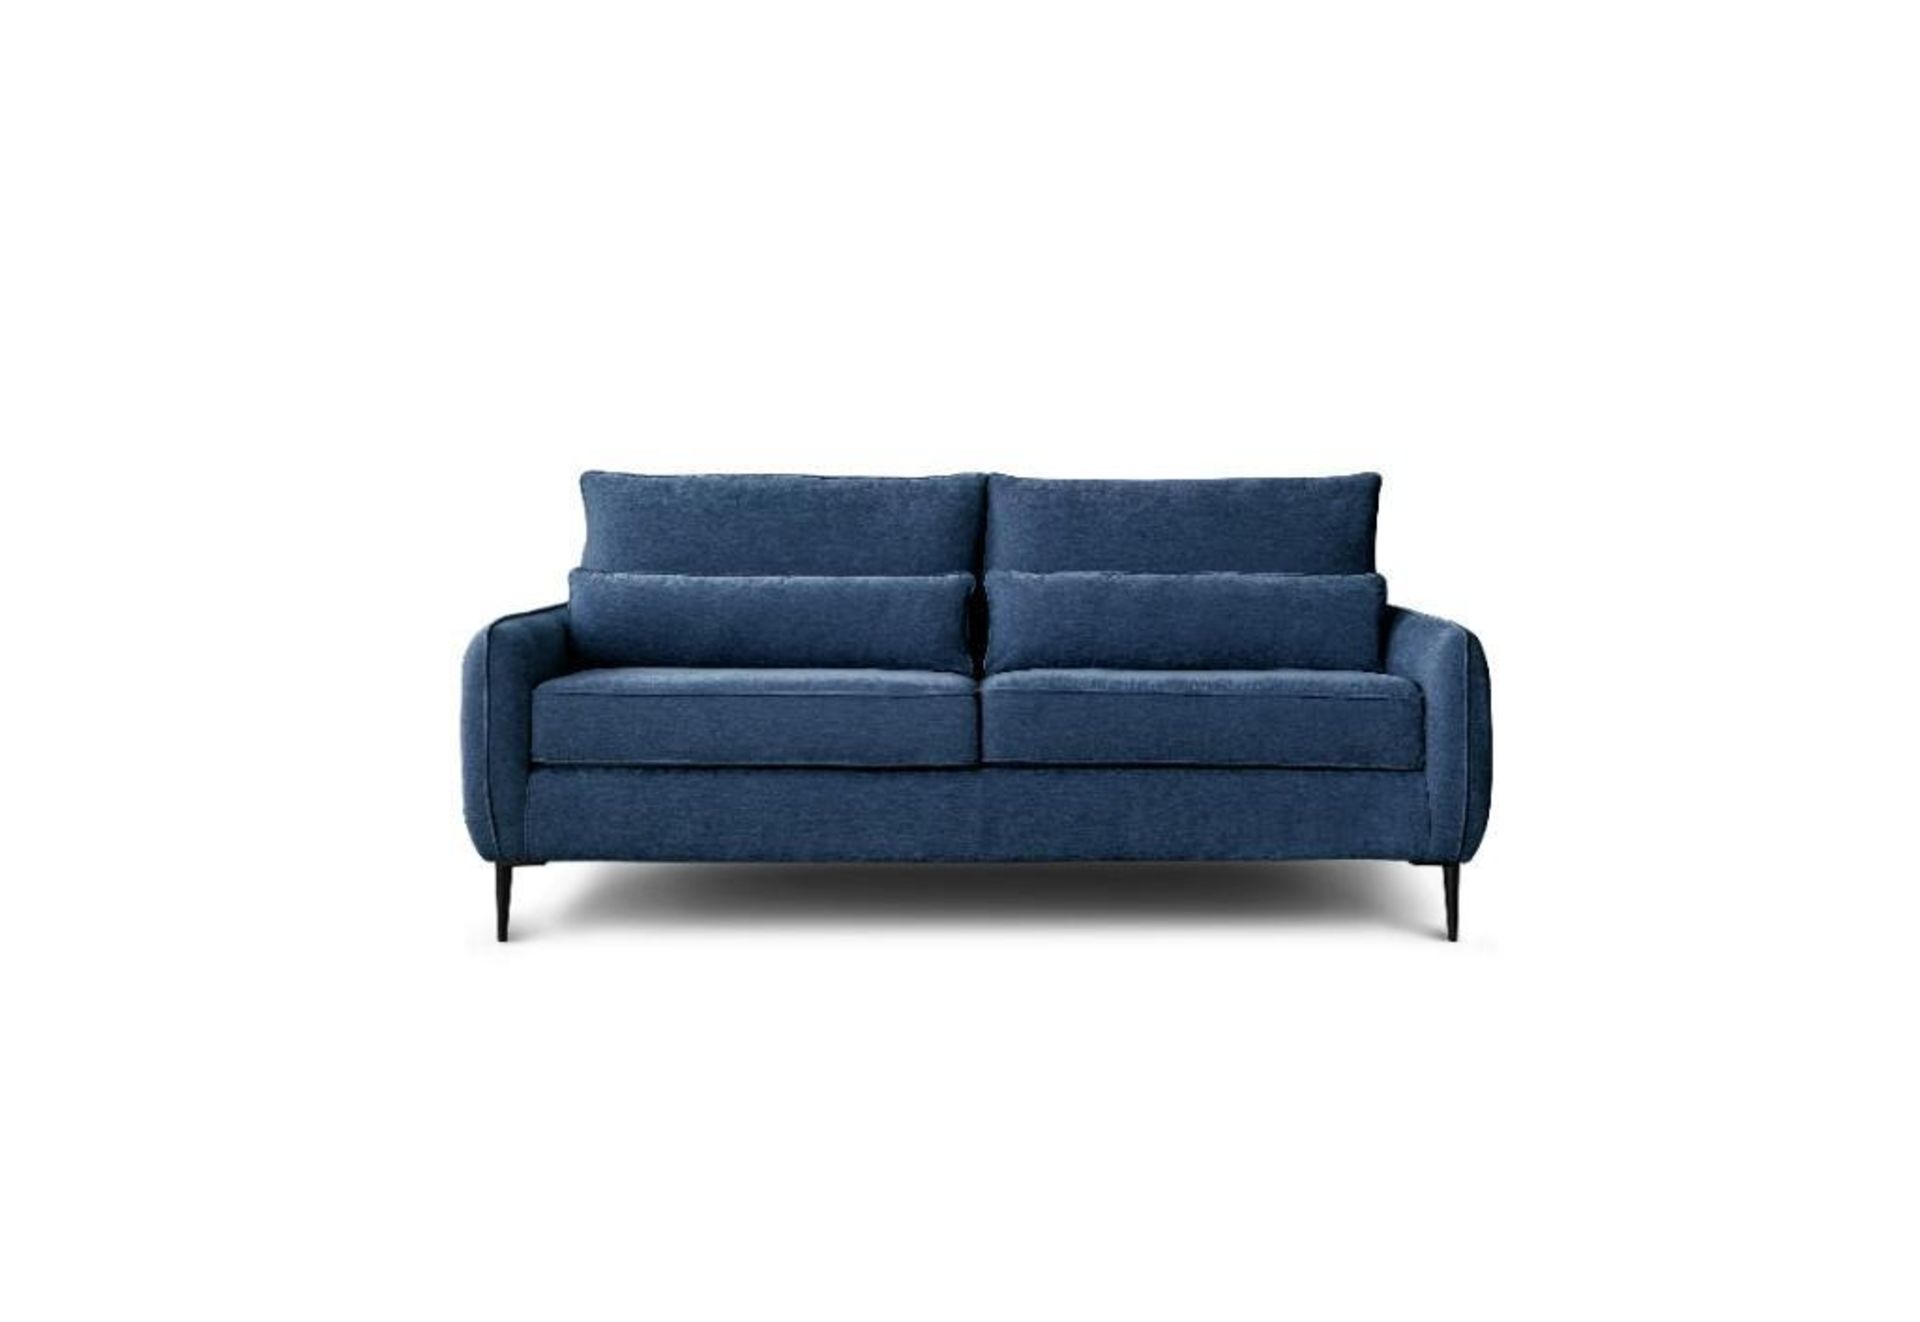 Brand new Boxed 3 Seater Rhonda Sofa in Navy - Image 3 of 3